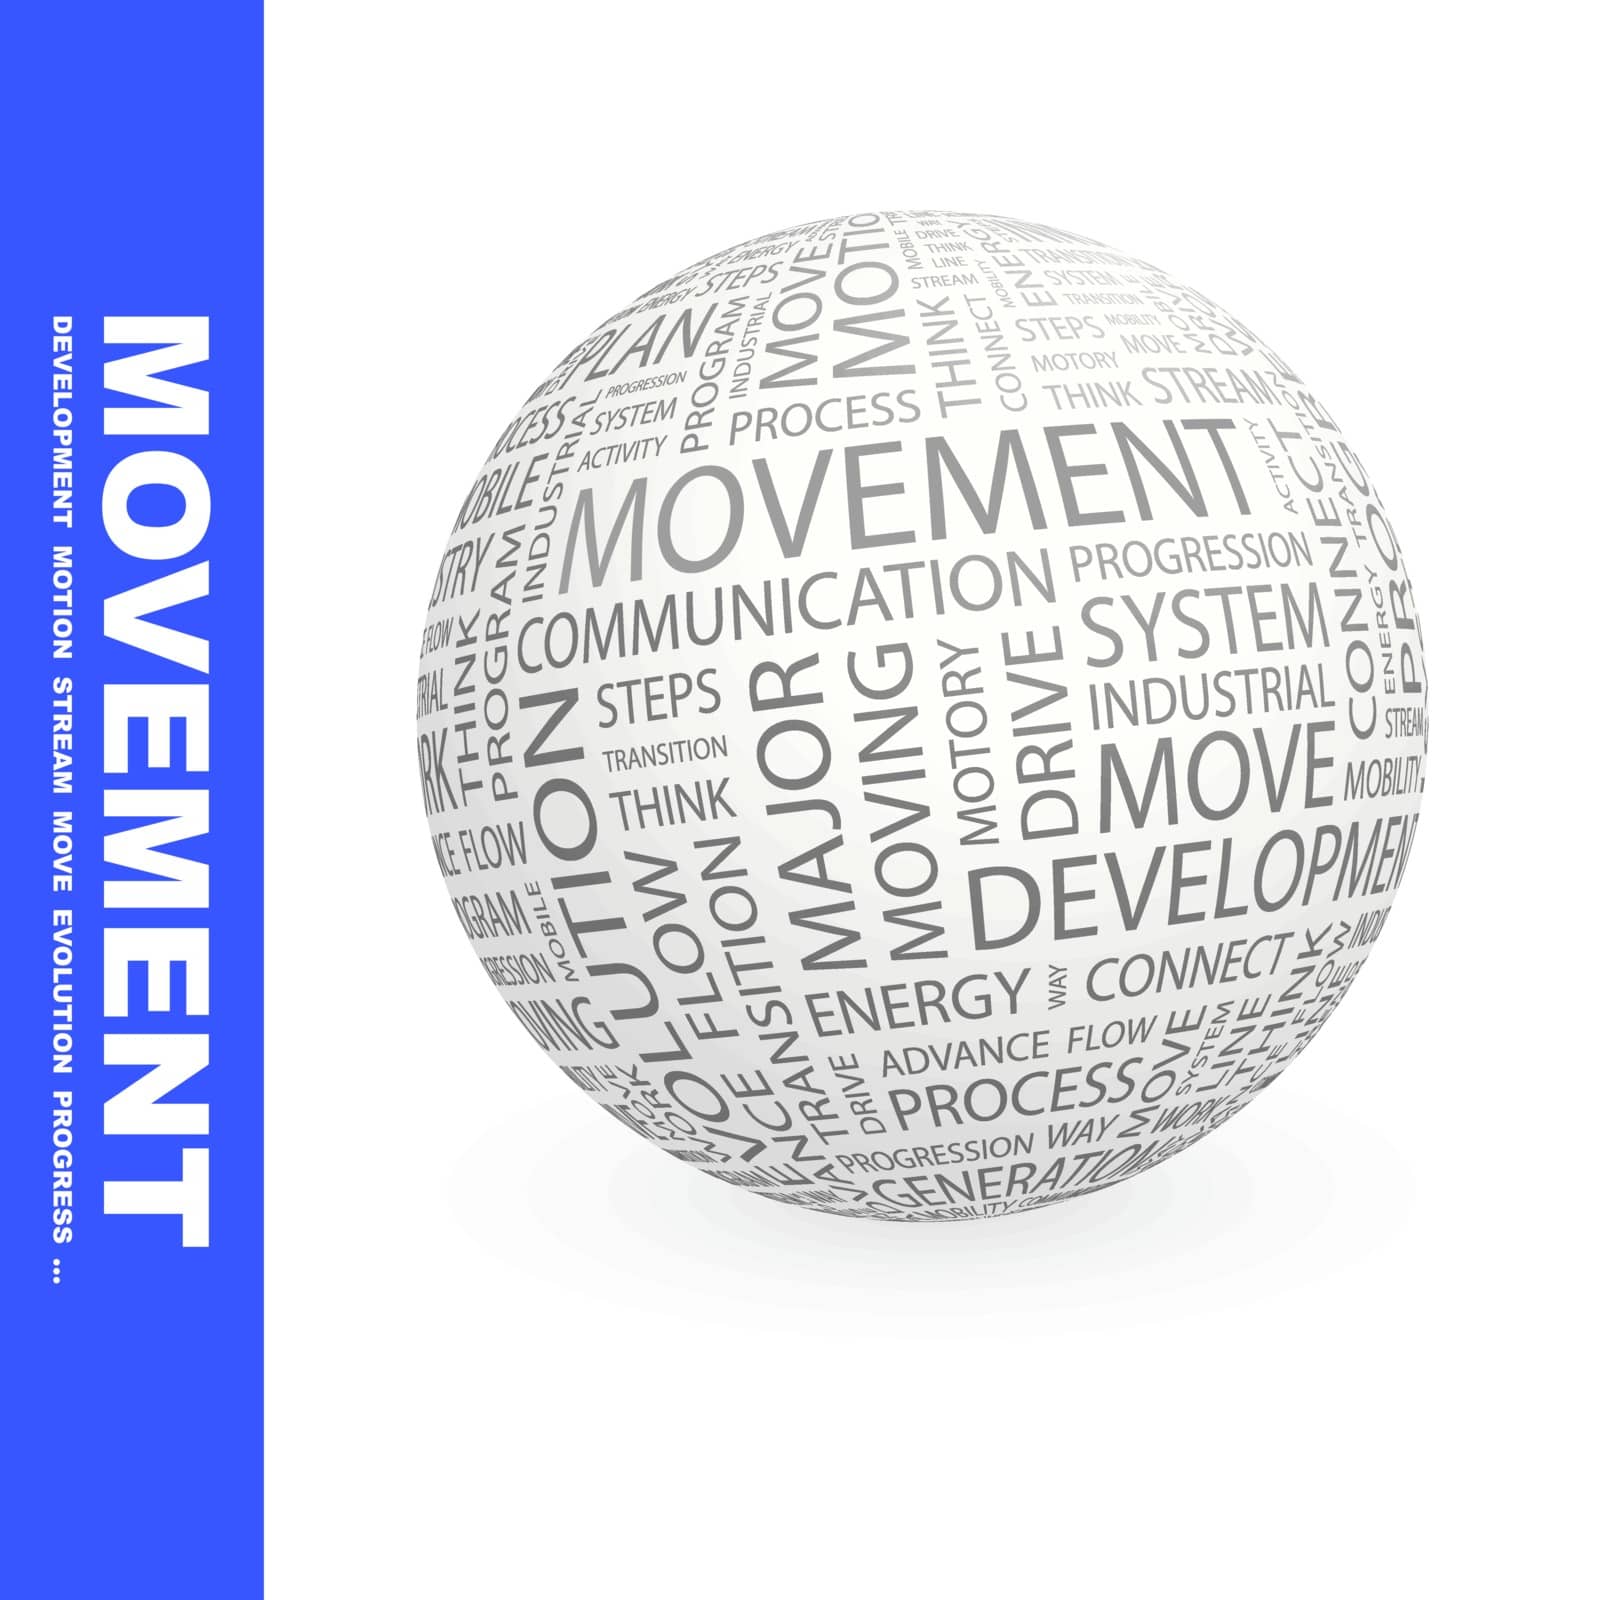 MOVEMENT. Concept illustration. Graphic tag collection. Wordcloud collage.